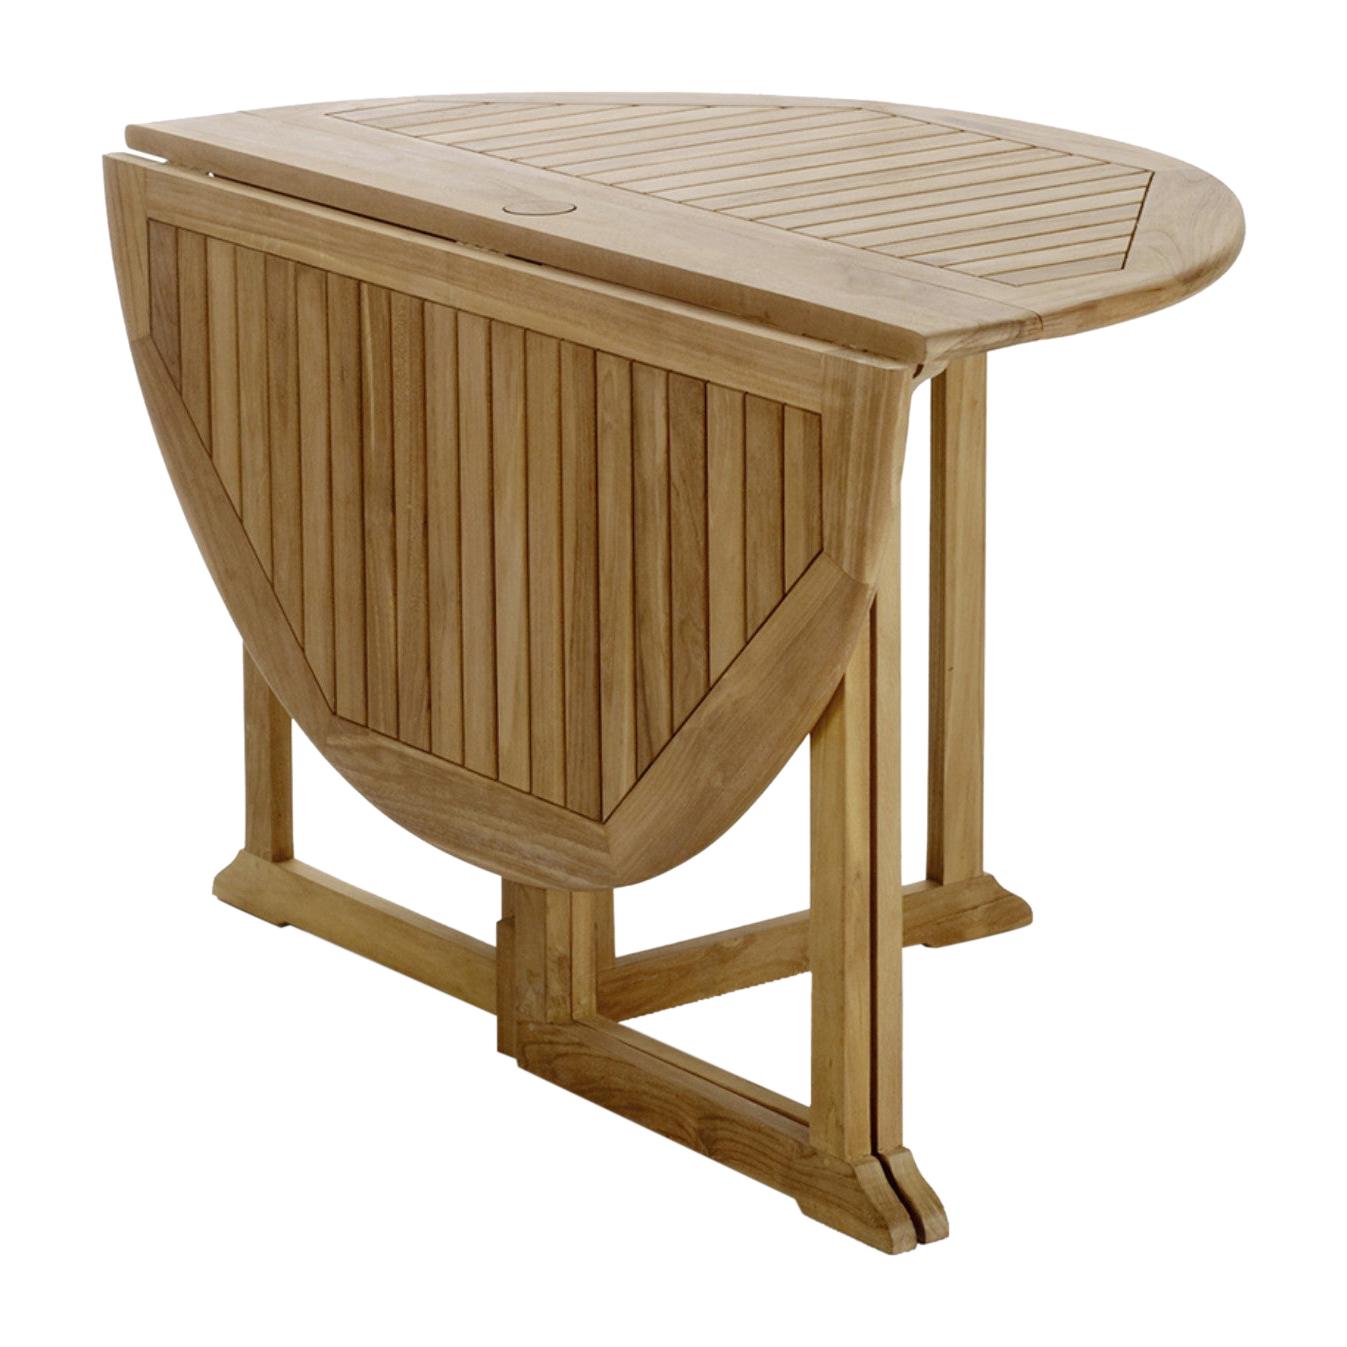 New Teak Round Foldable DIning Table, Indoor and Outdoor